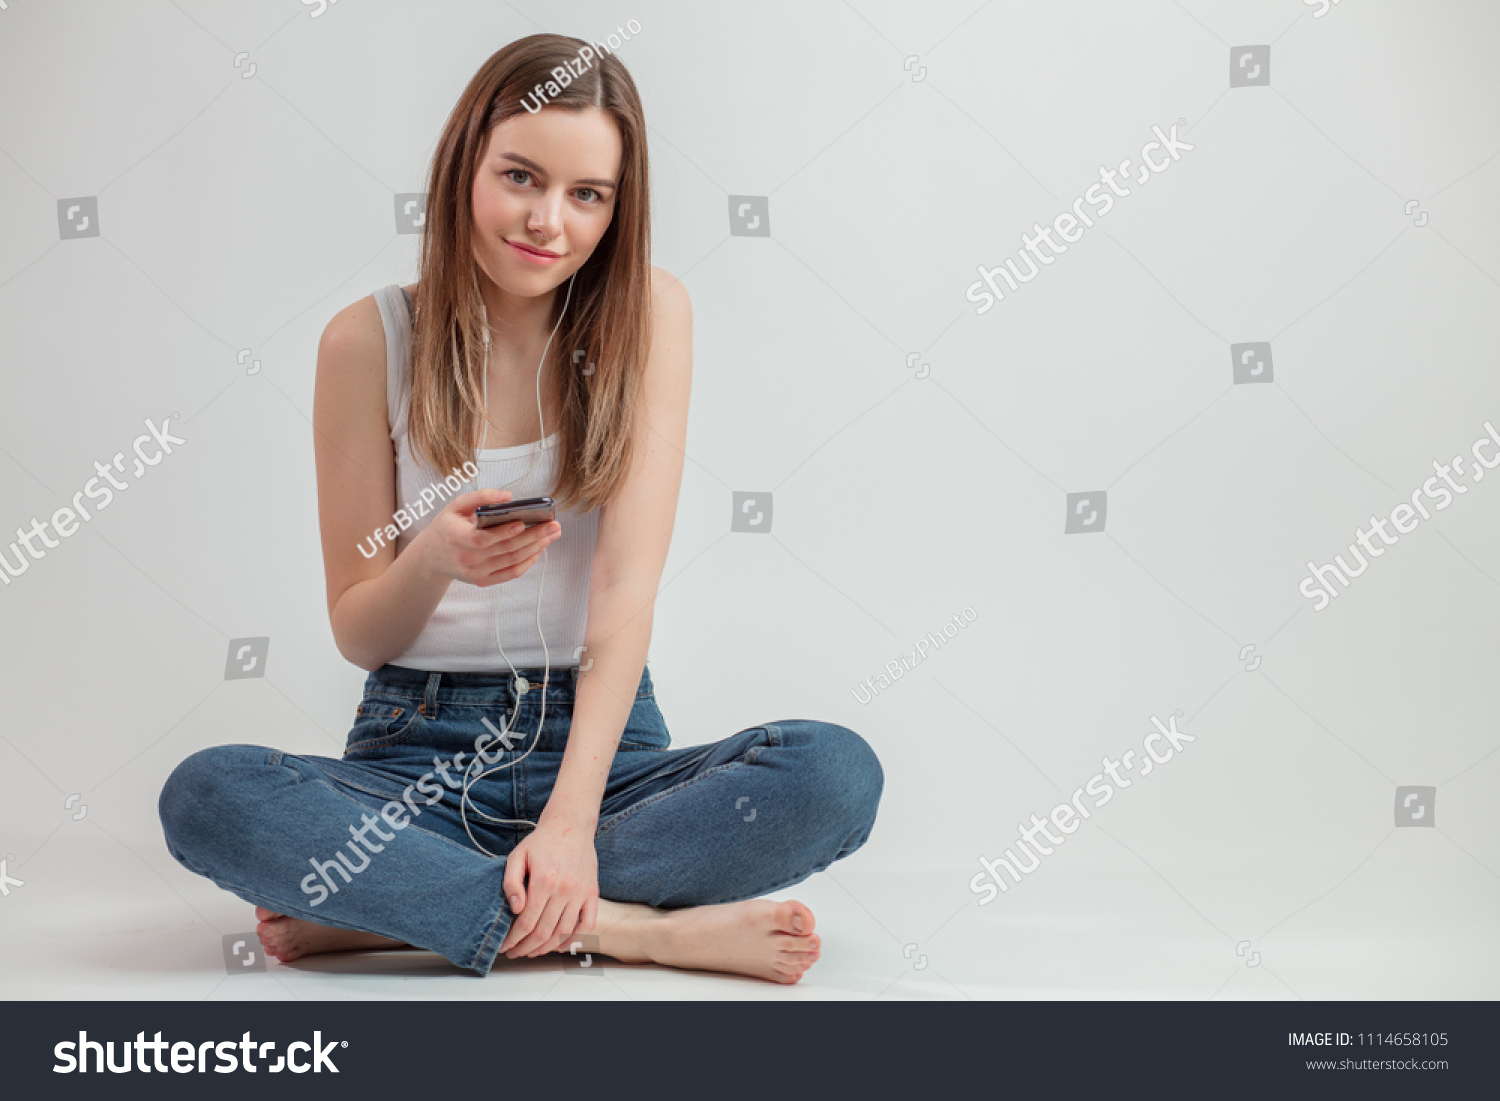 fair-haired cool girl holding mobile phone isolated on the white background. copy space. free time #1114658105